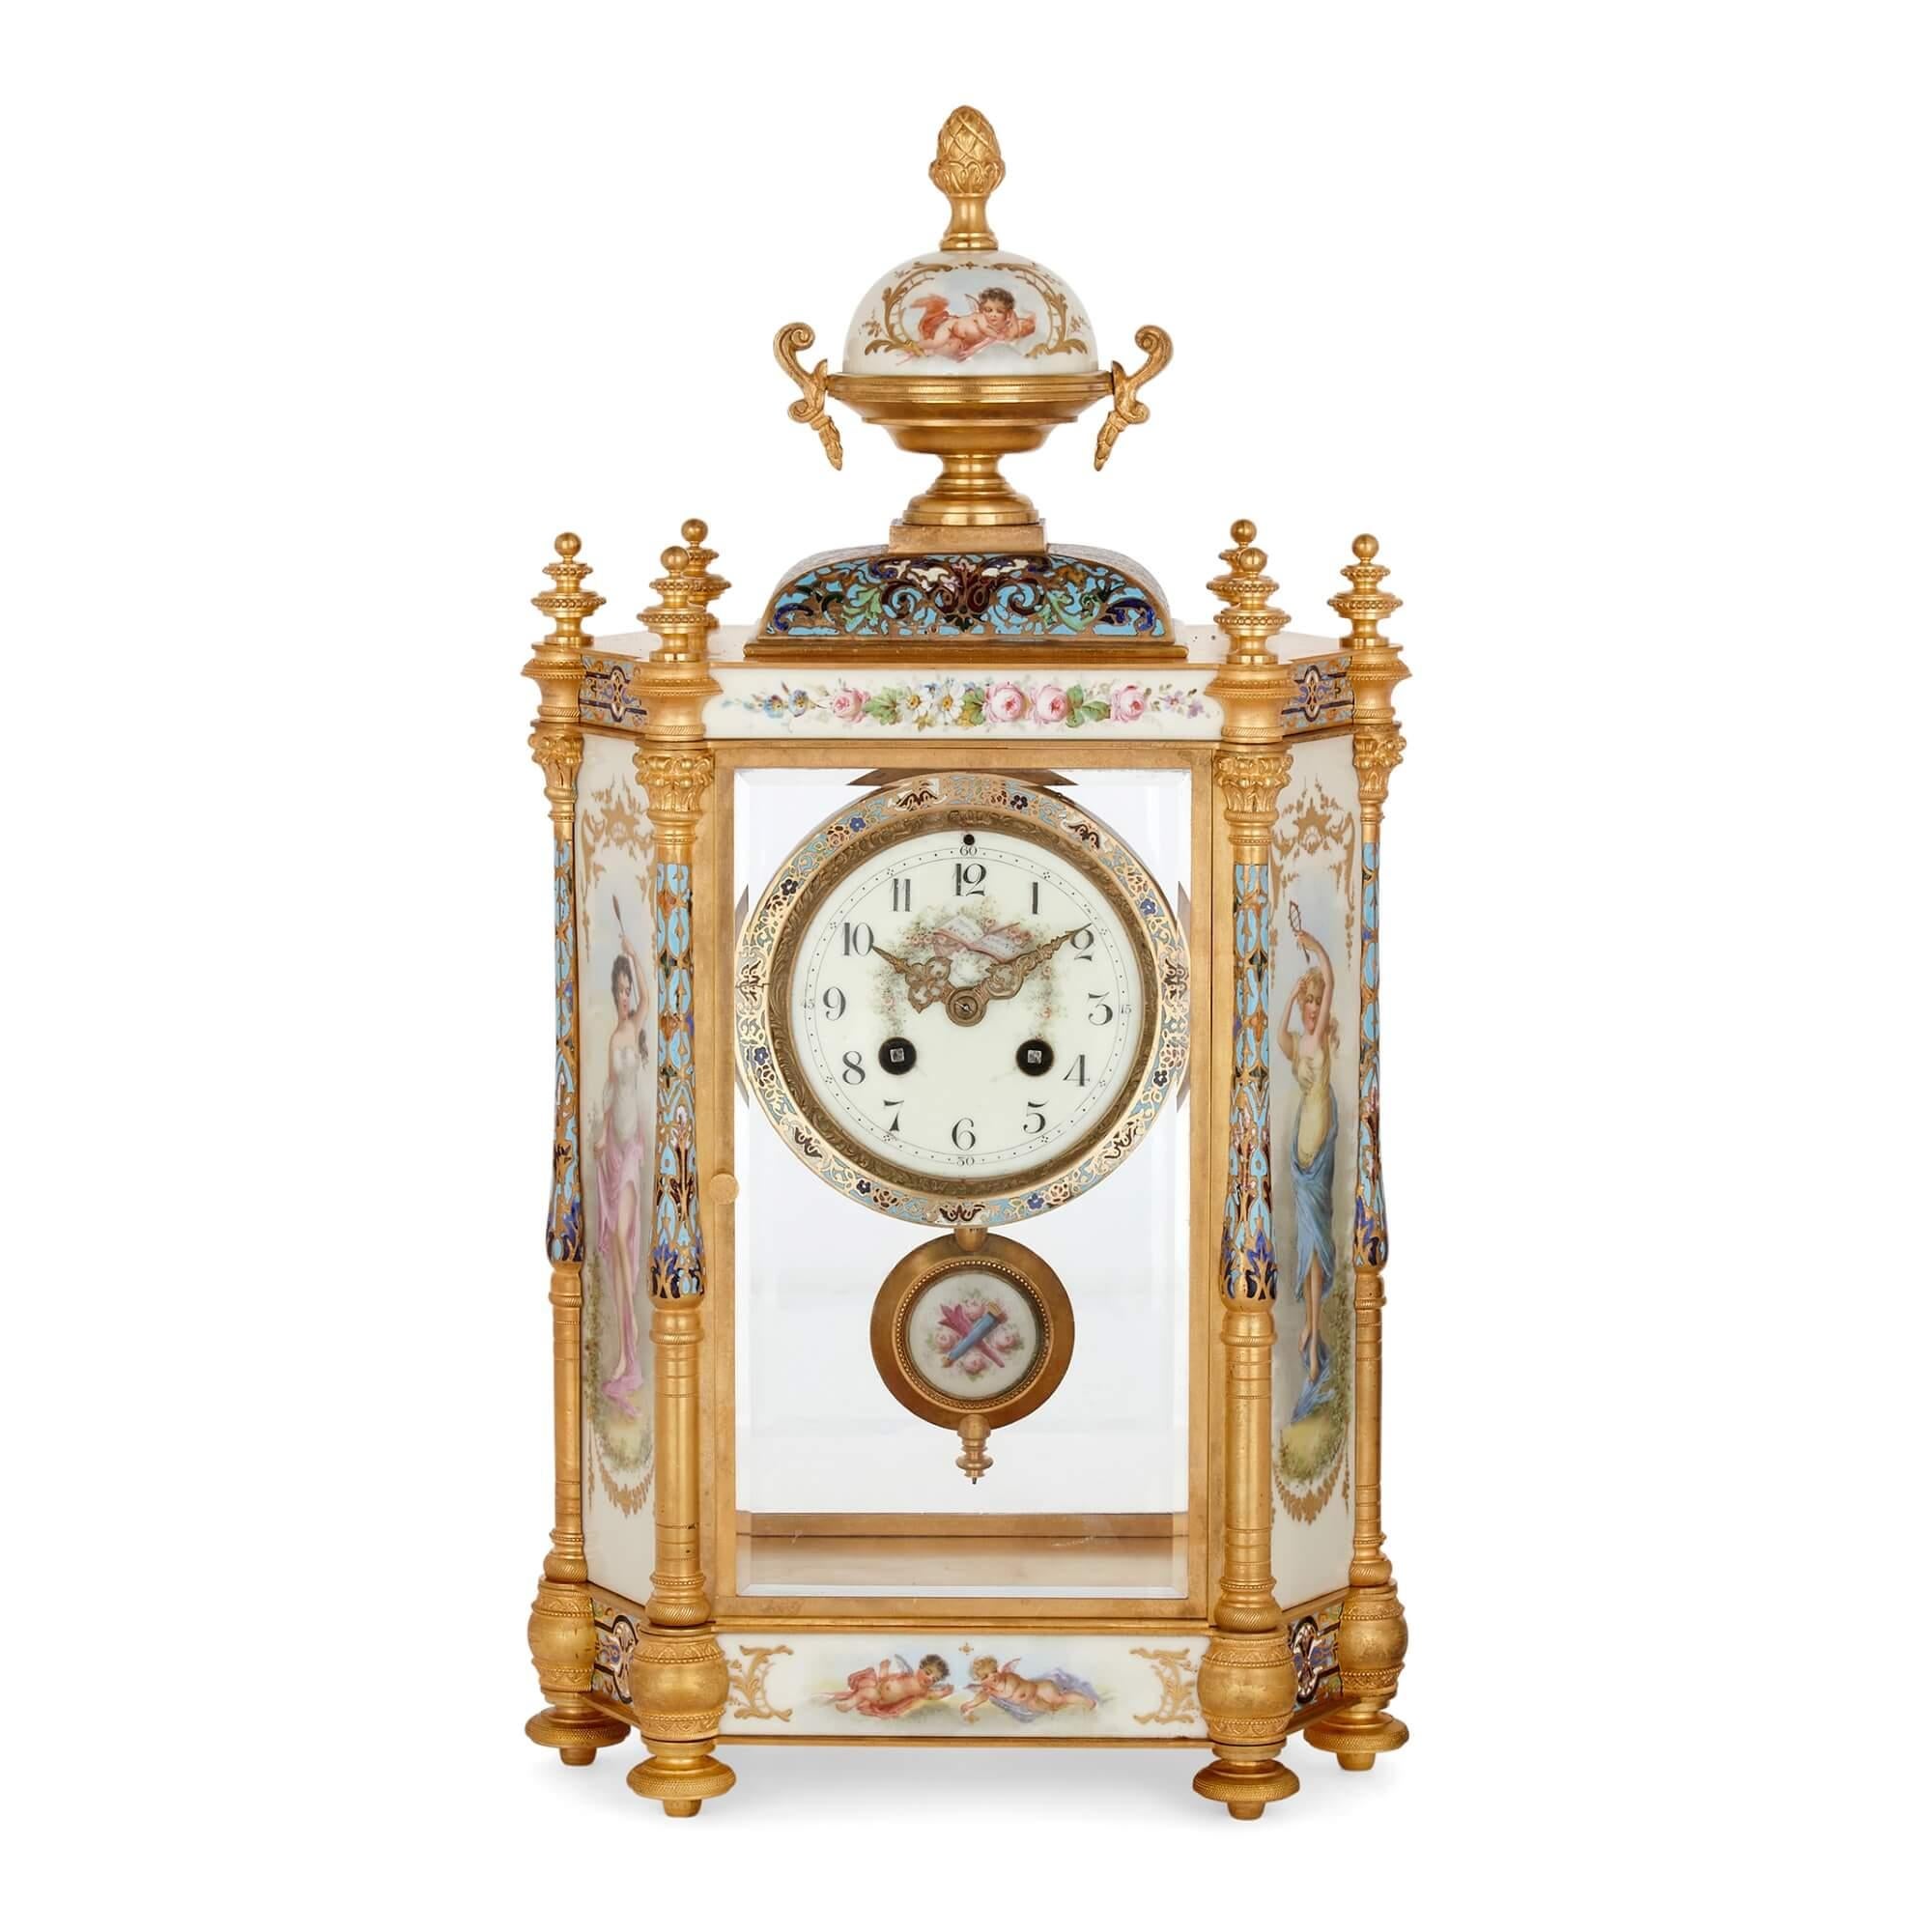 Large three-piece porcelain, champlevé enamel, and ormolu mounted clock set
French, late 19th century
Measures: Clock: height 46cm, width 25cm, depth 15cm
Vases: height 38cm, width 14cm, depth 11cm

This exceptional antique clock set consists